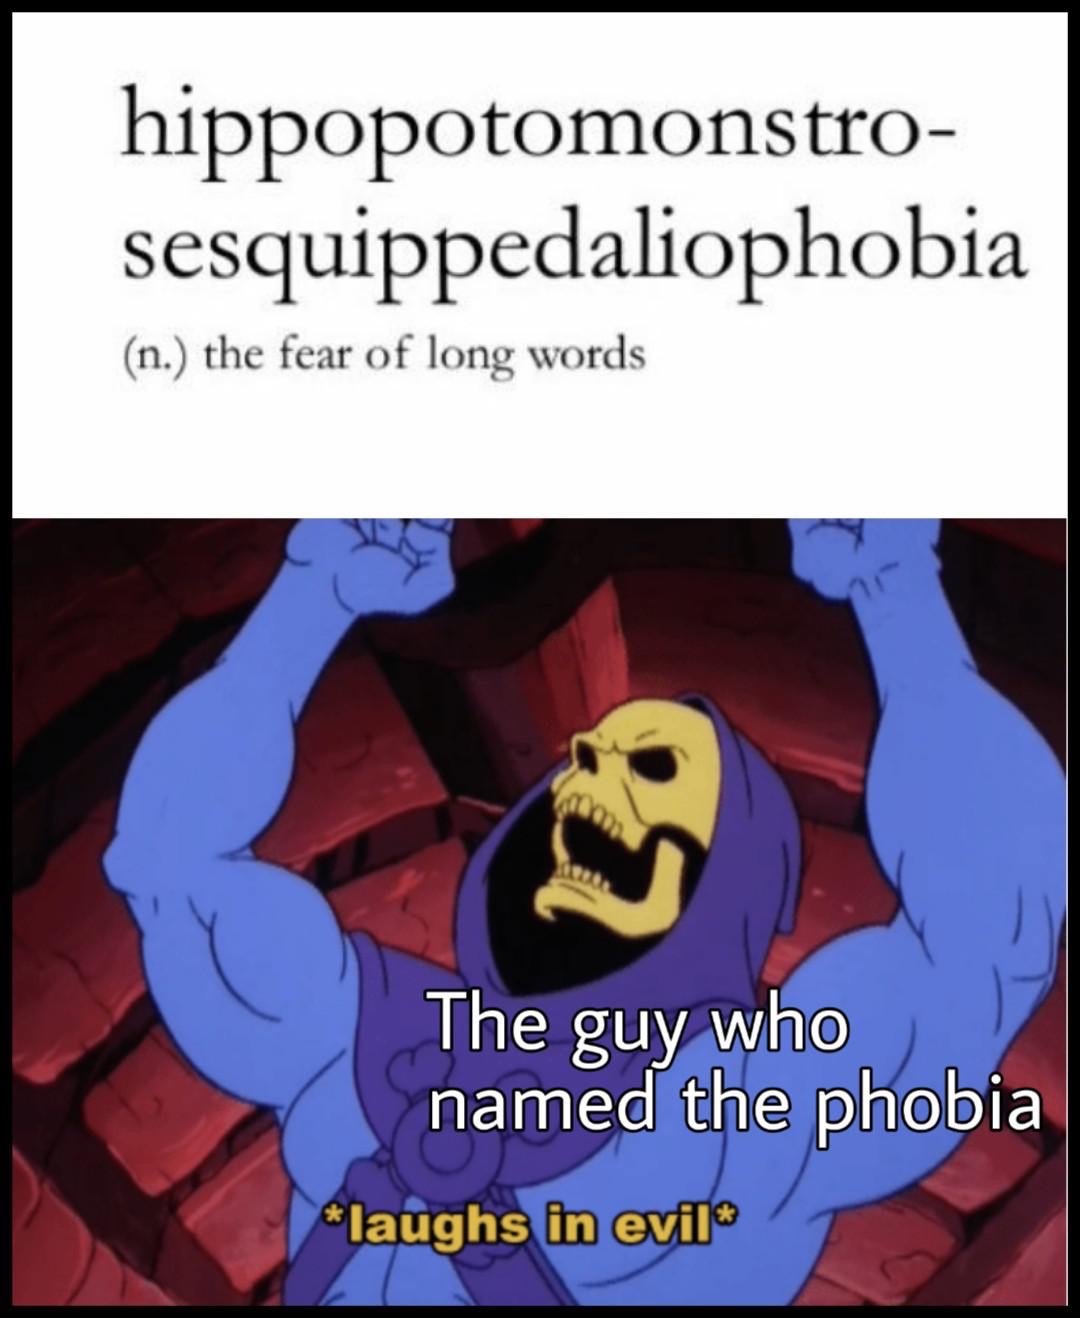 skeletor meme - hippopotomonstro sesquippedaliophobia n. the fear of long words The guy who named the phobia laughs in evil